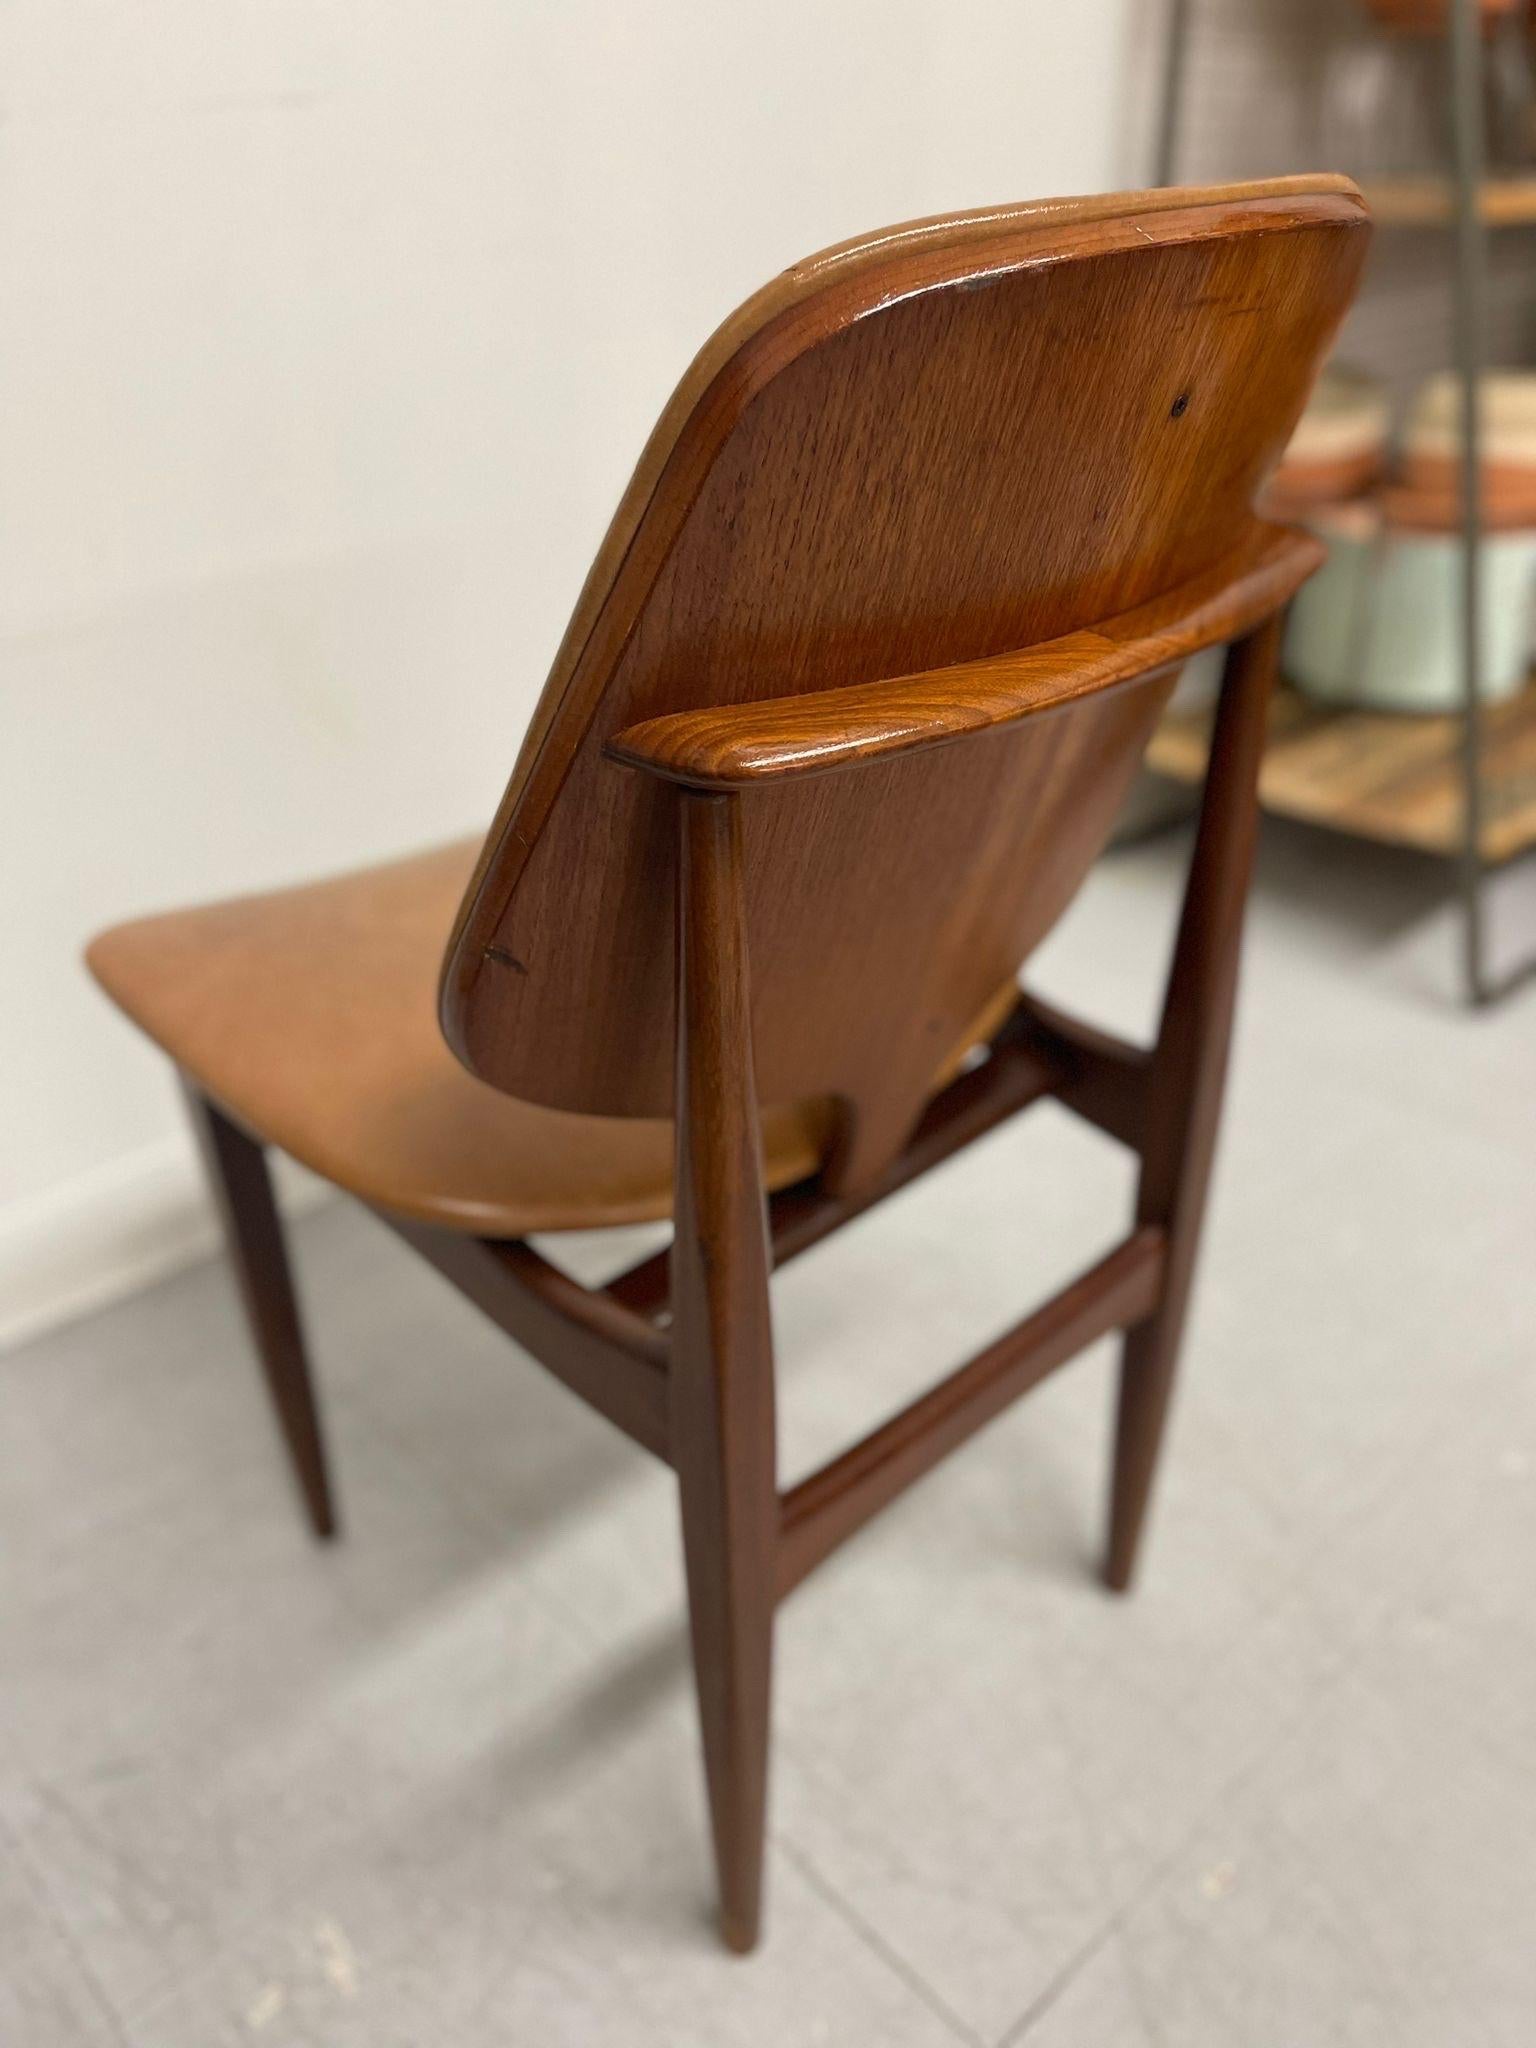 Mid-20th Century Vintage Mid Century Modern Walnut Toned Chair. For Sale